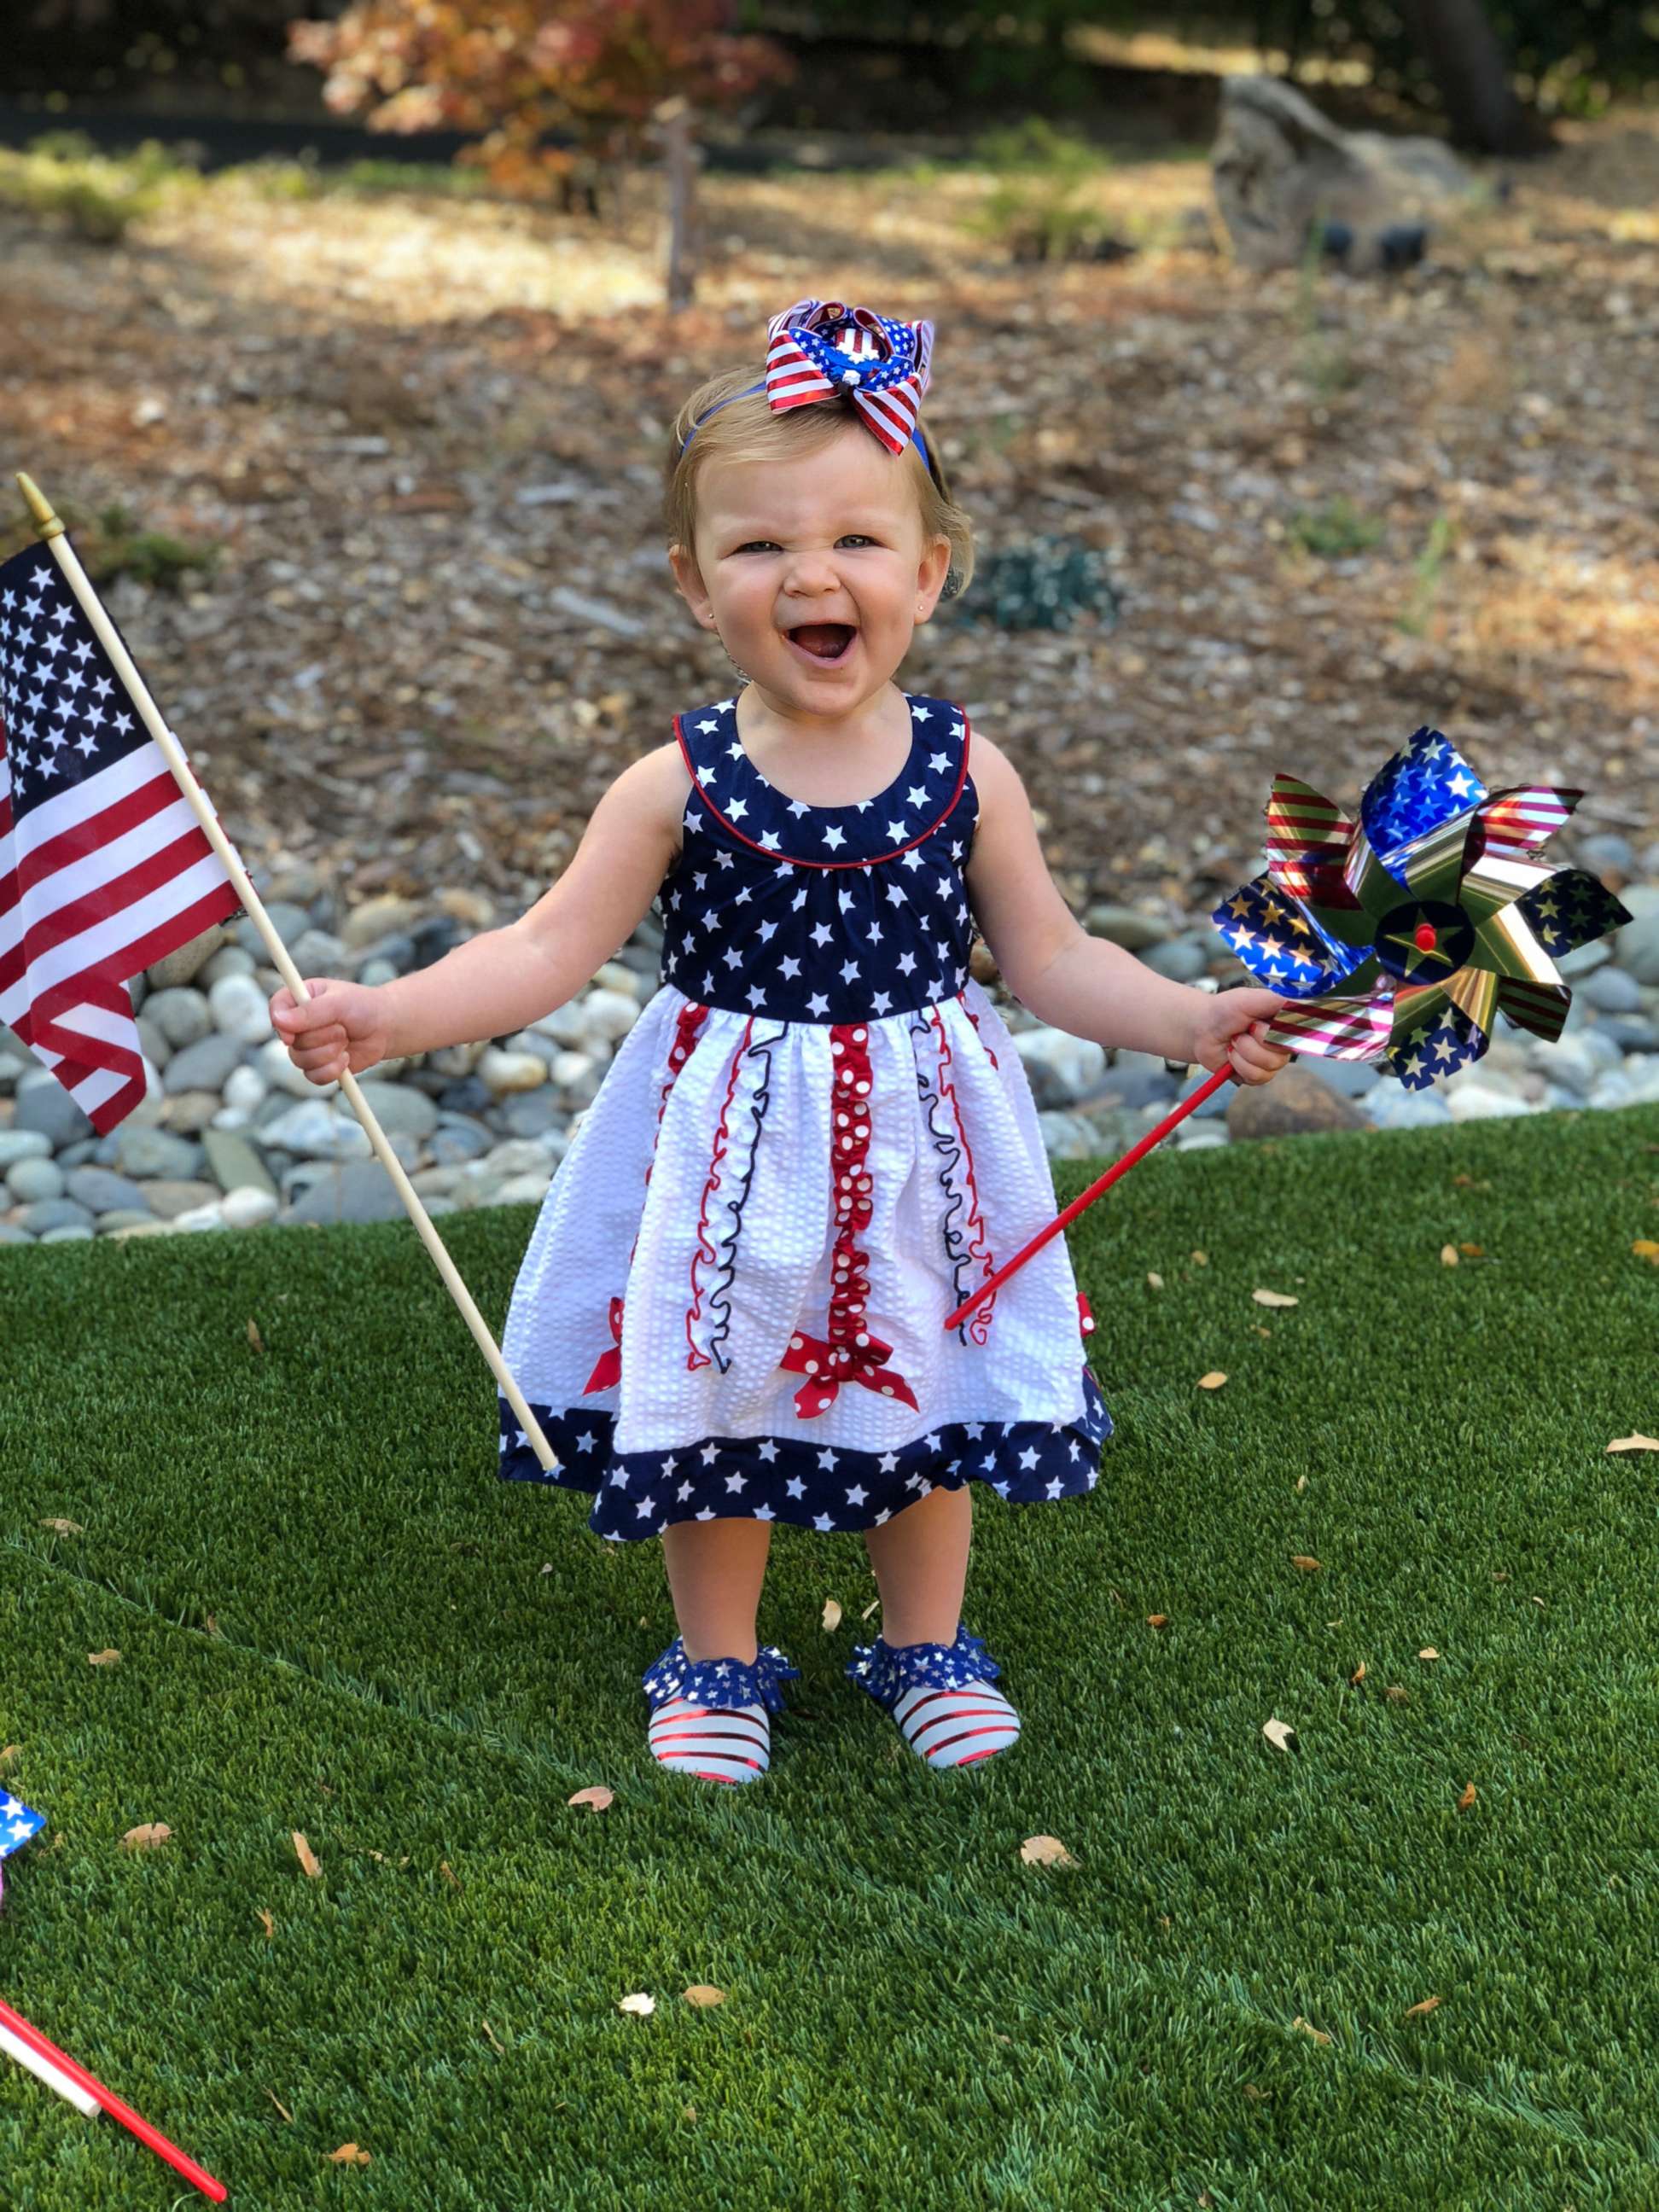 PHOTO: Amelia Bubenik, 2, of Granite Bay, Calif., was captured on viral video in May singing the national anthem by her mother, Amy.